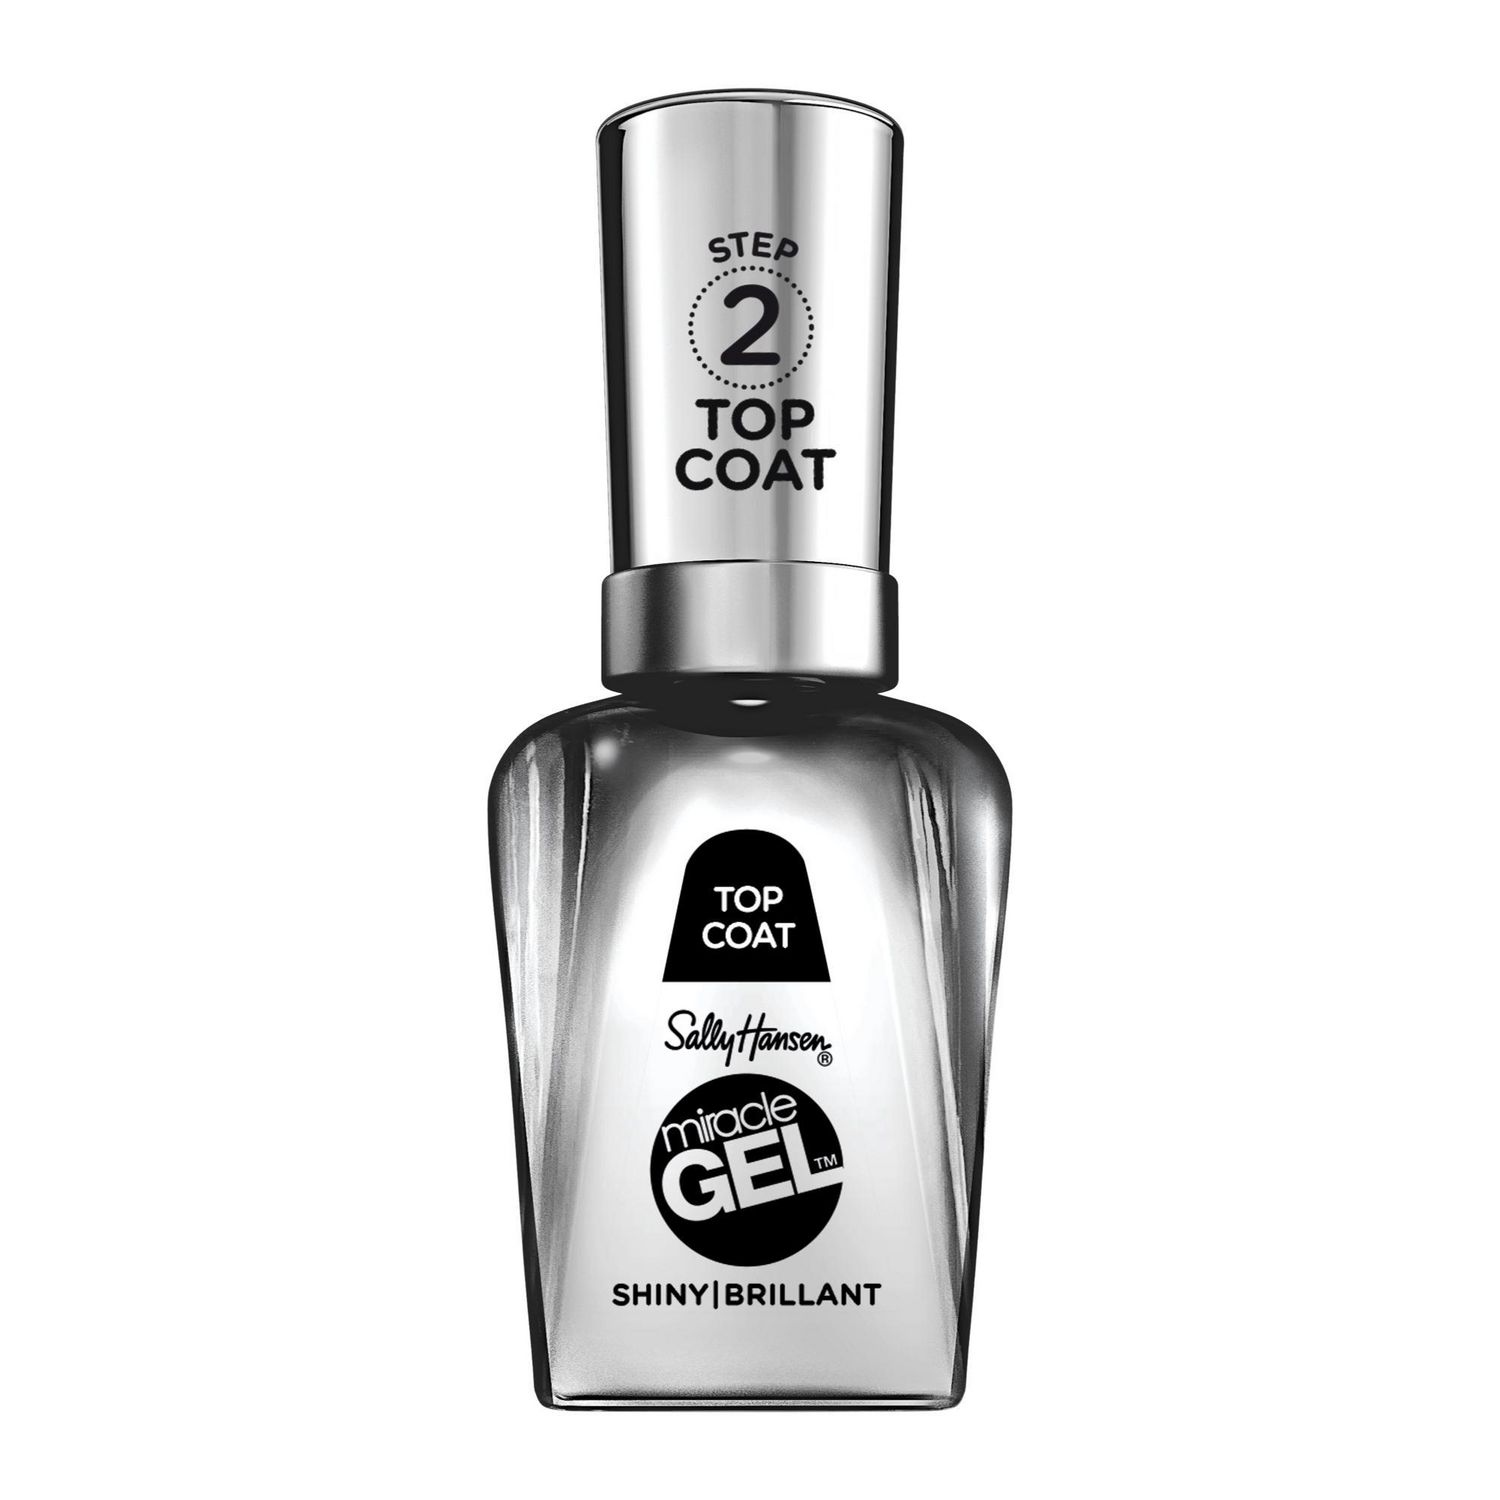 Sally Hansen Miracle Gel™ Top Coat Activator, Step Gel-like System, No  UV Light Needed, Up to Day of colour  shine, Chip-resistant and long-wear  nail polish